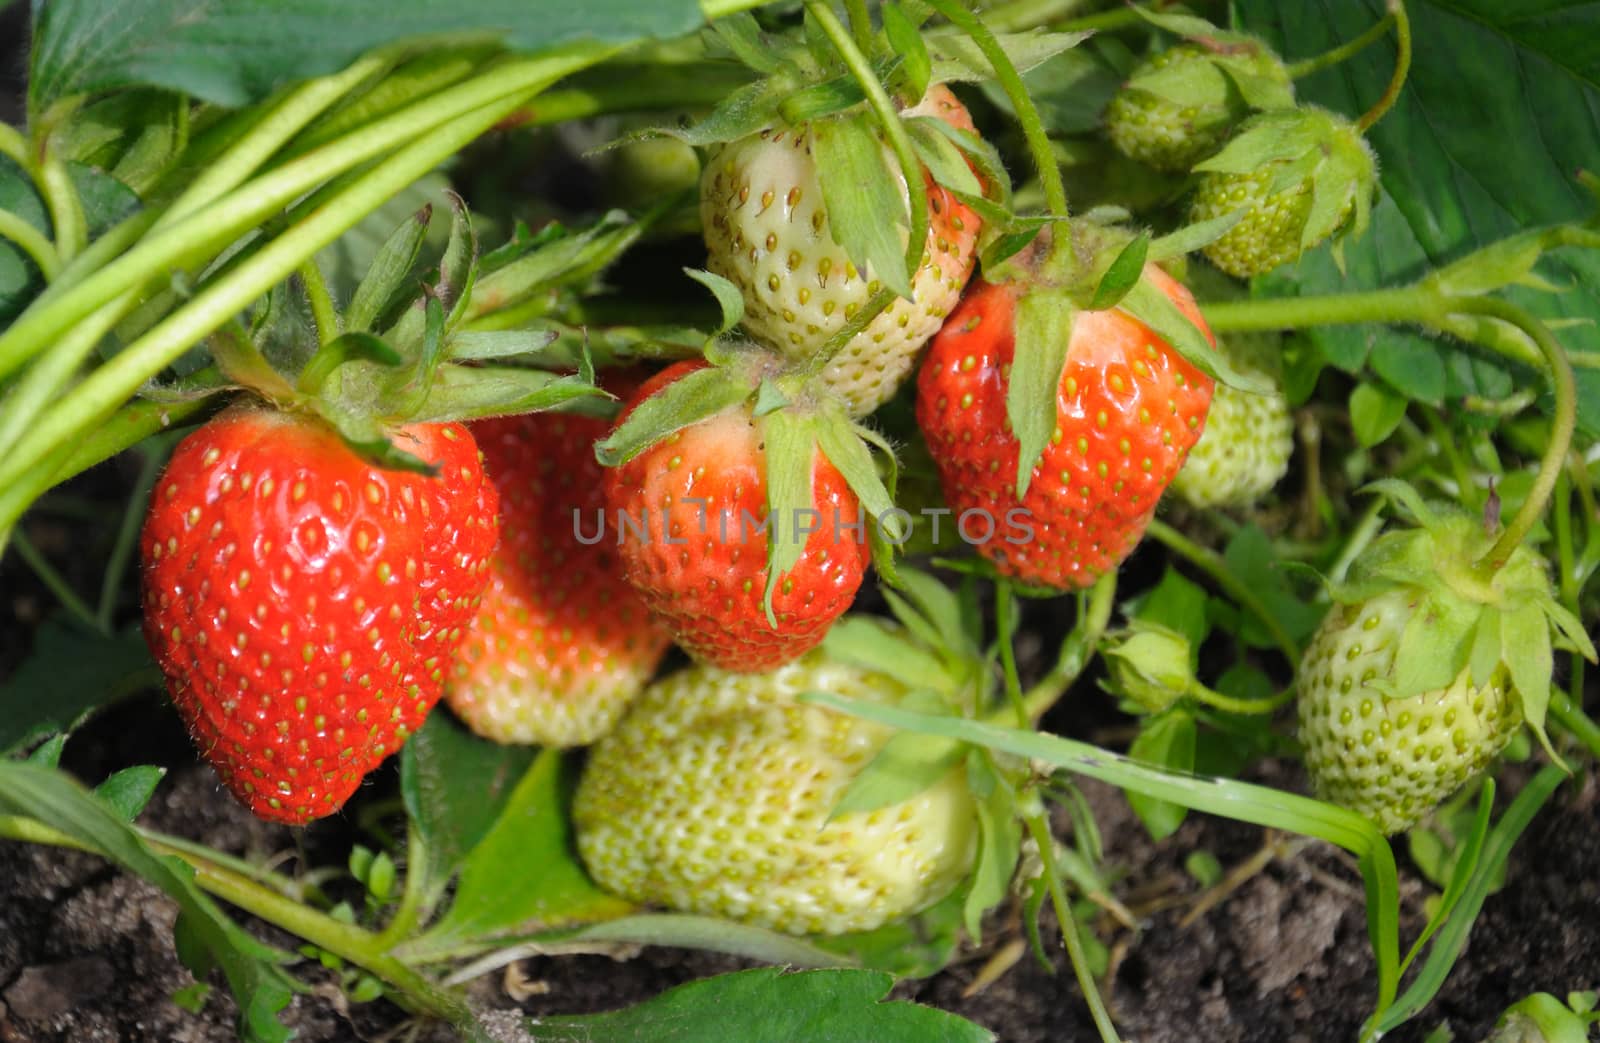 Close-up view of the group of strawberries in a natural scene